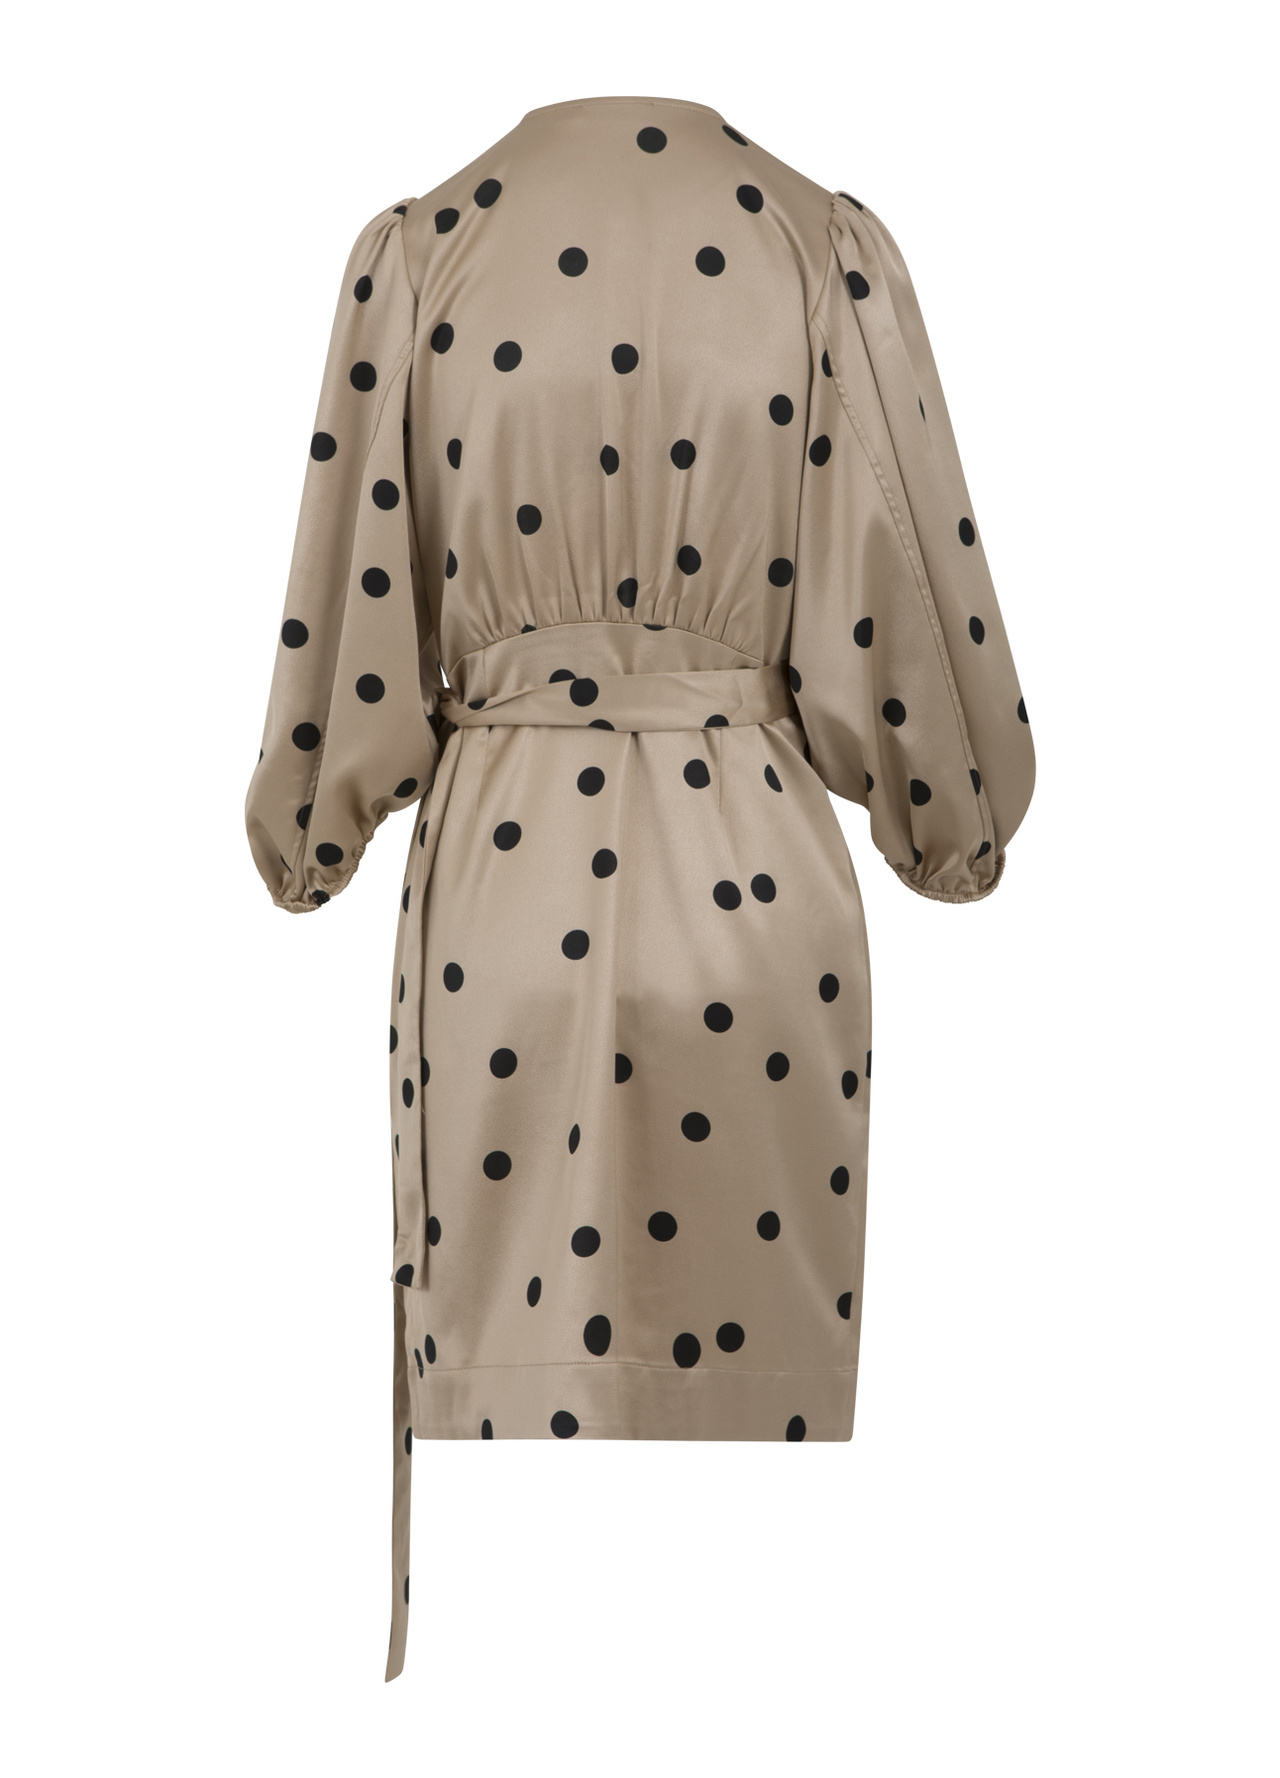 Dress with Wide Sleeves in Dot Print